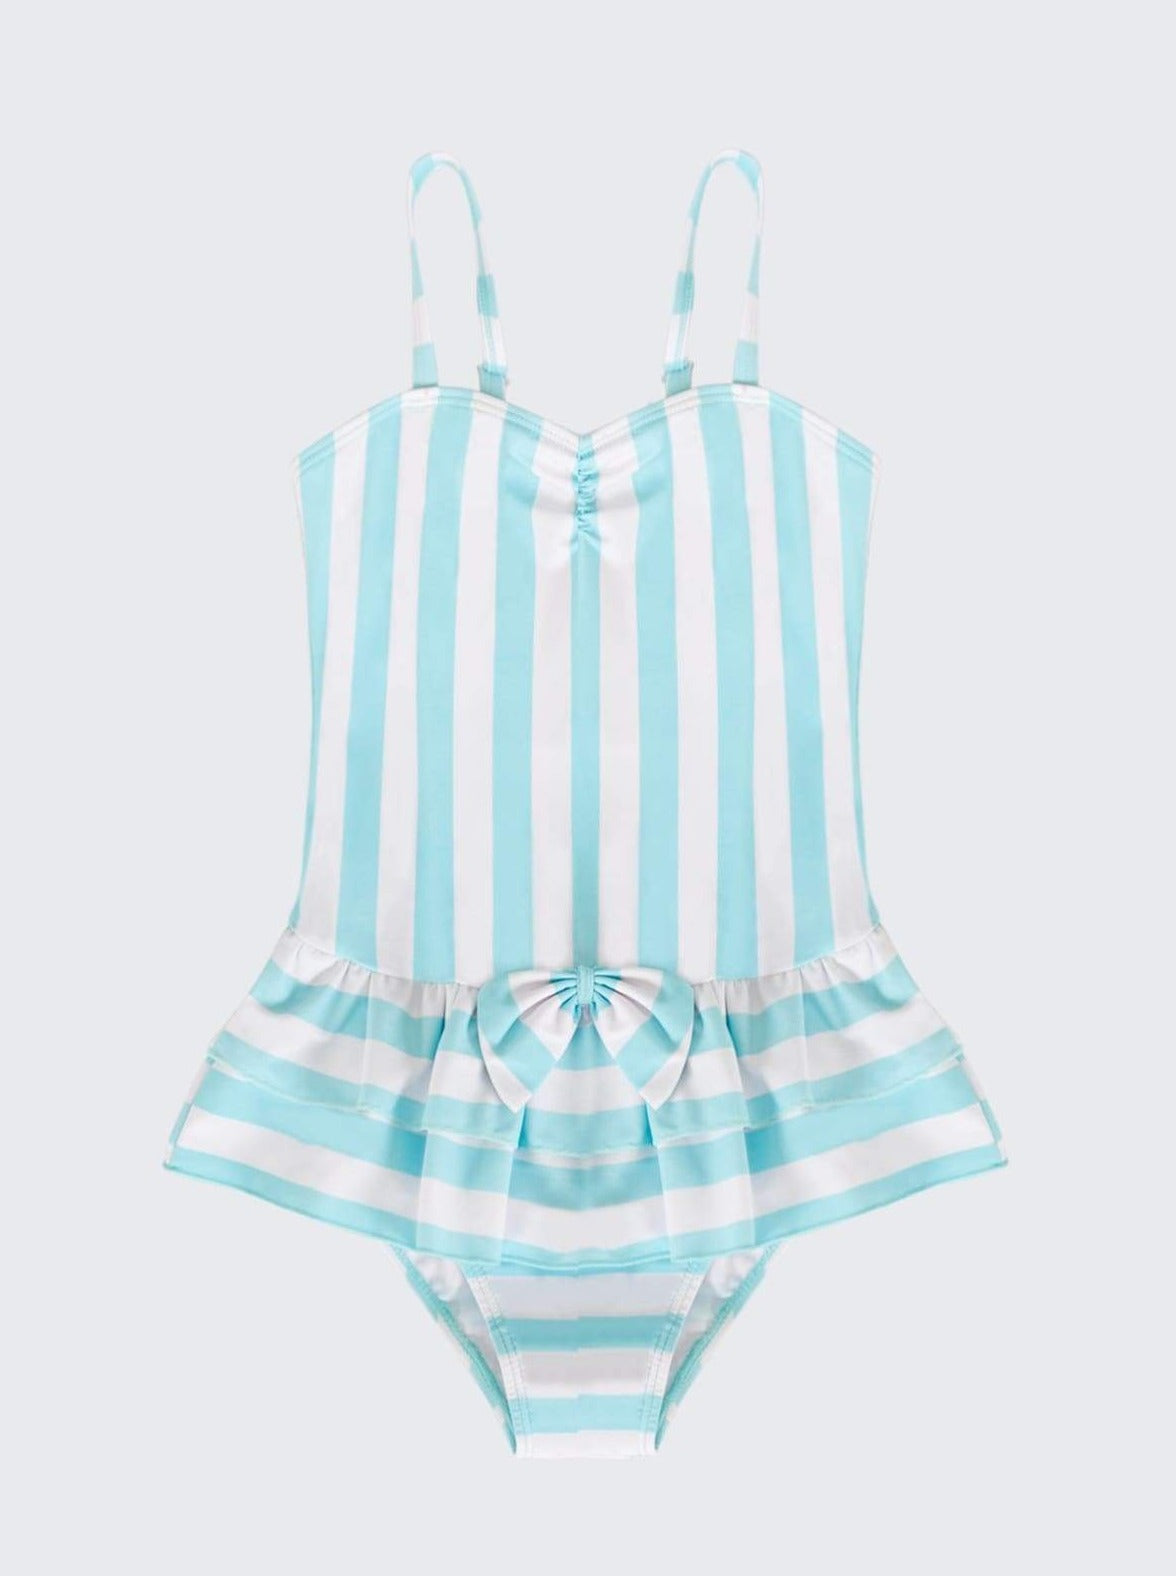 Girls Skirted Striped One Piece Swimsuit - Girls One Piece Swimsuit